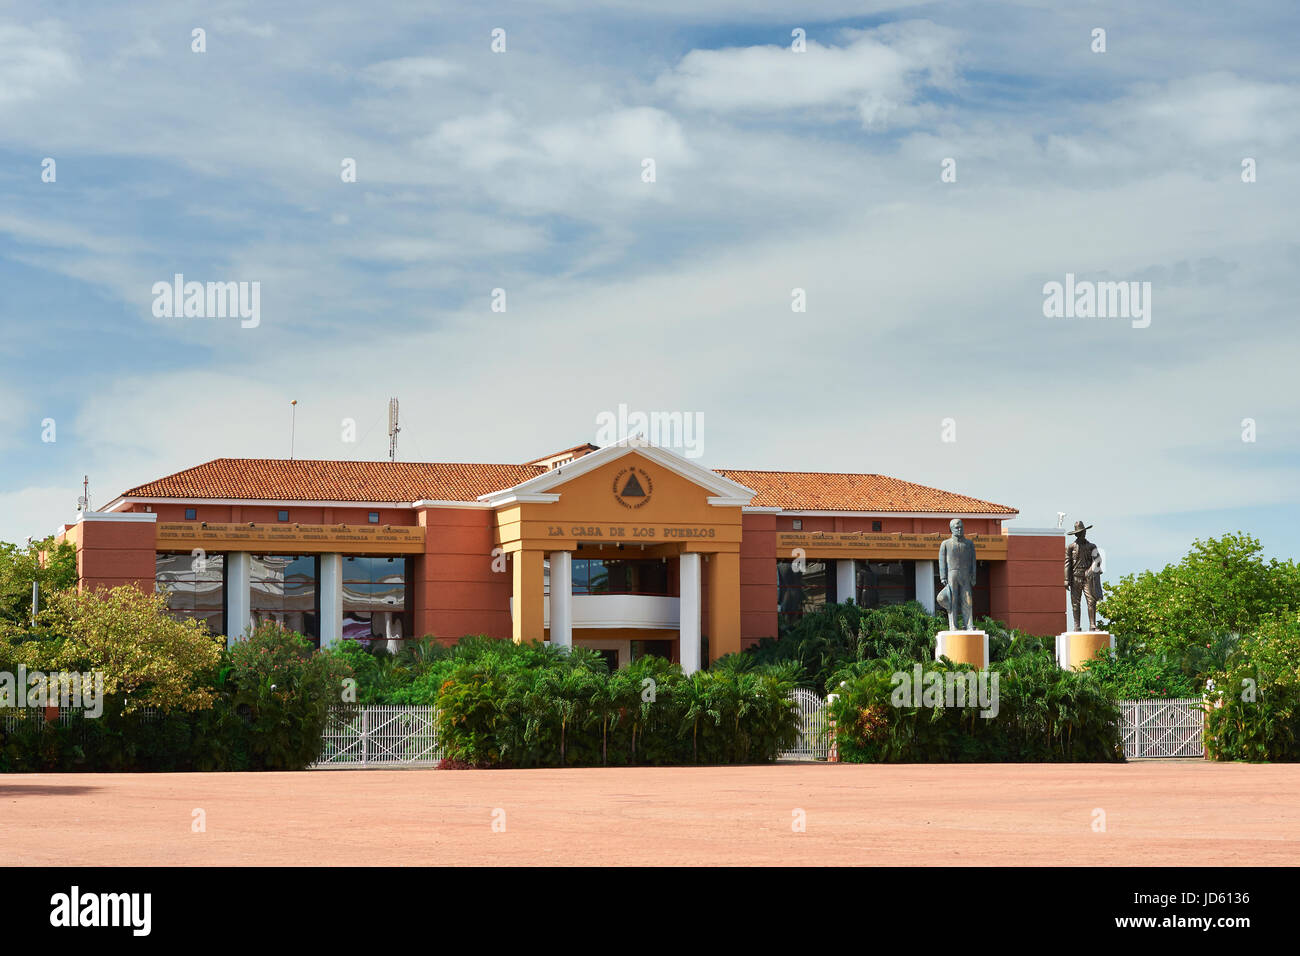 Managua, Nicaragua - June 13, 2017: President house in Managua on central square in sunny clear day Stock Photo